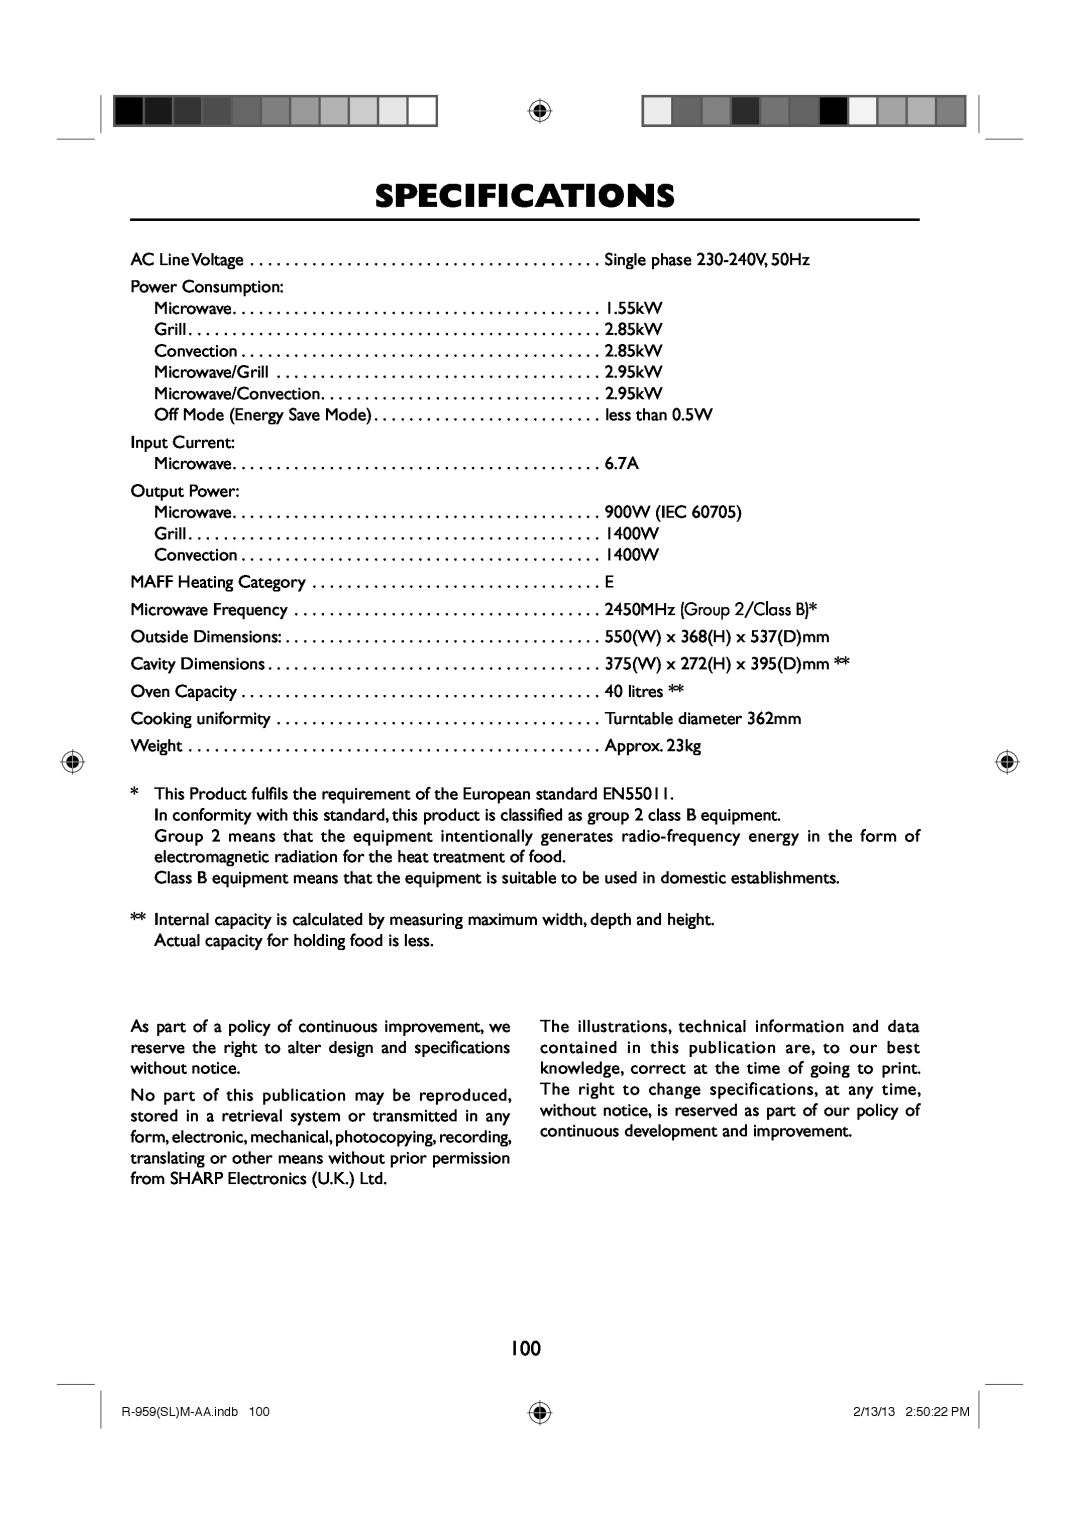 Sharp R-959(SL)M-AA manual Specifications 